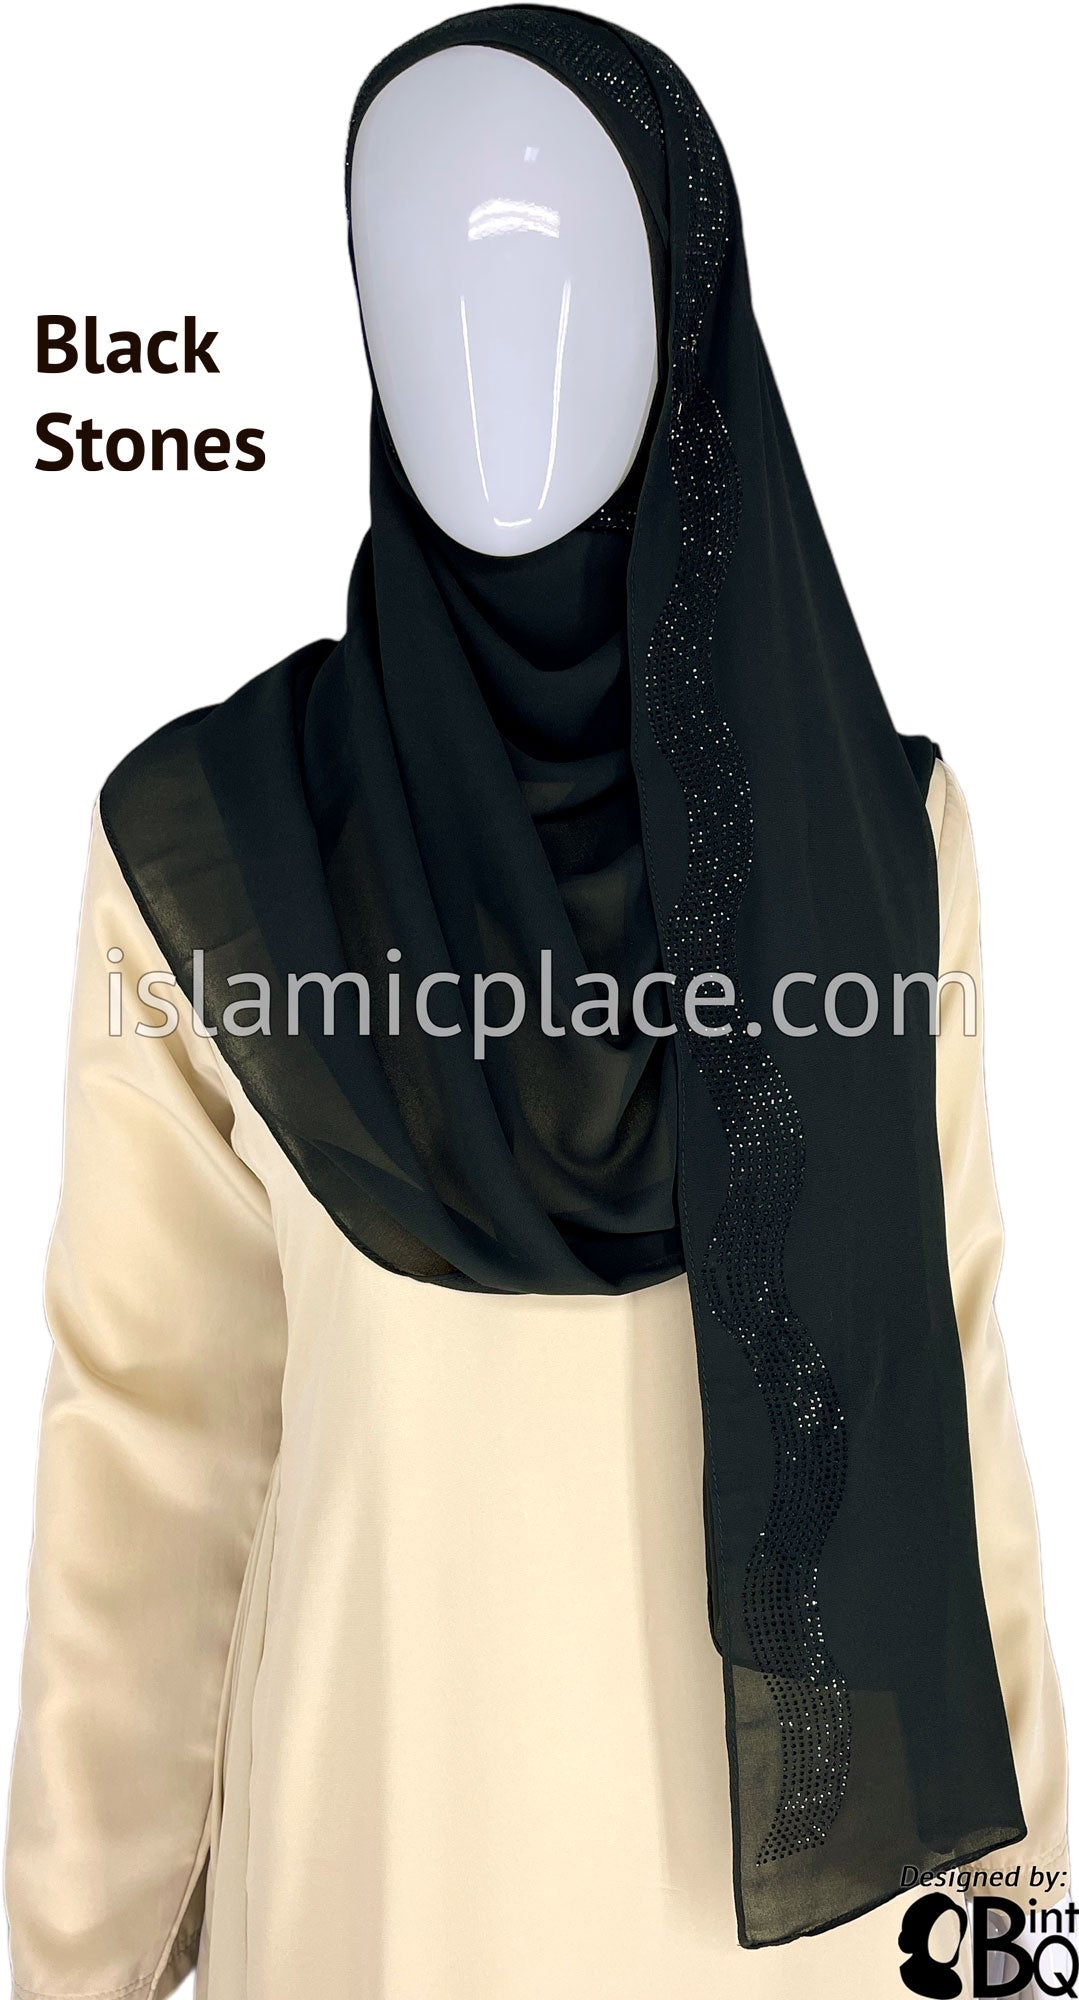 Black with Black Stones in Design 35 - Georgette Chiffon Shayla Long Rectangle Hijab 30"x70"